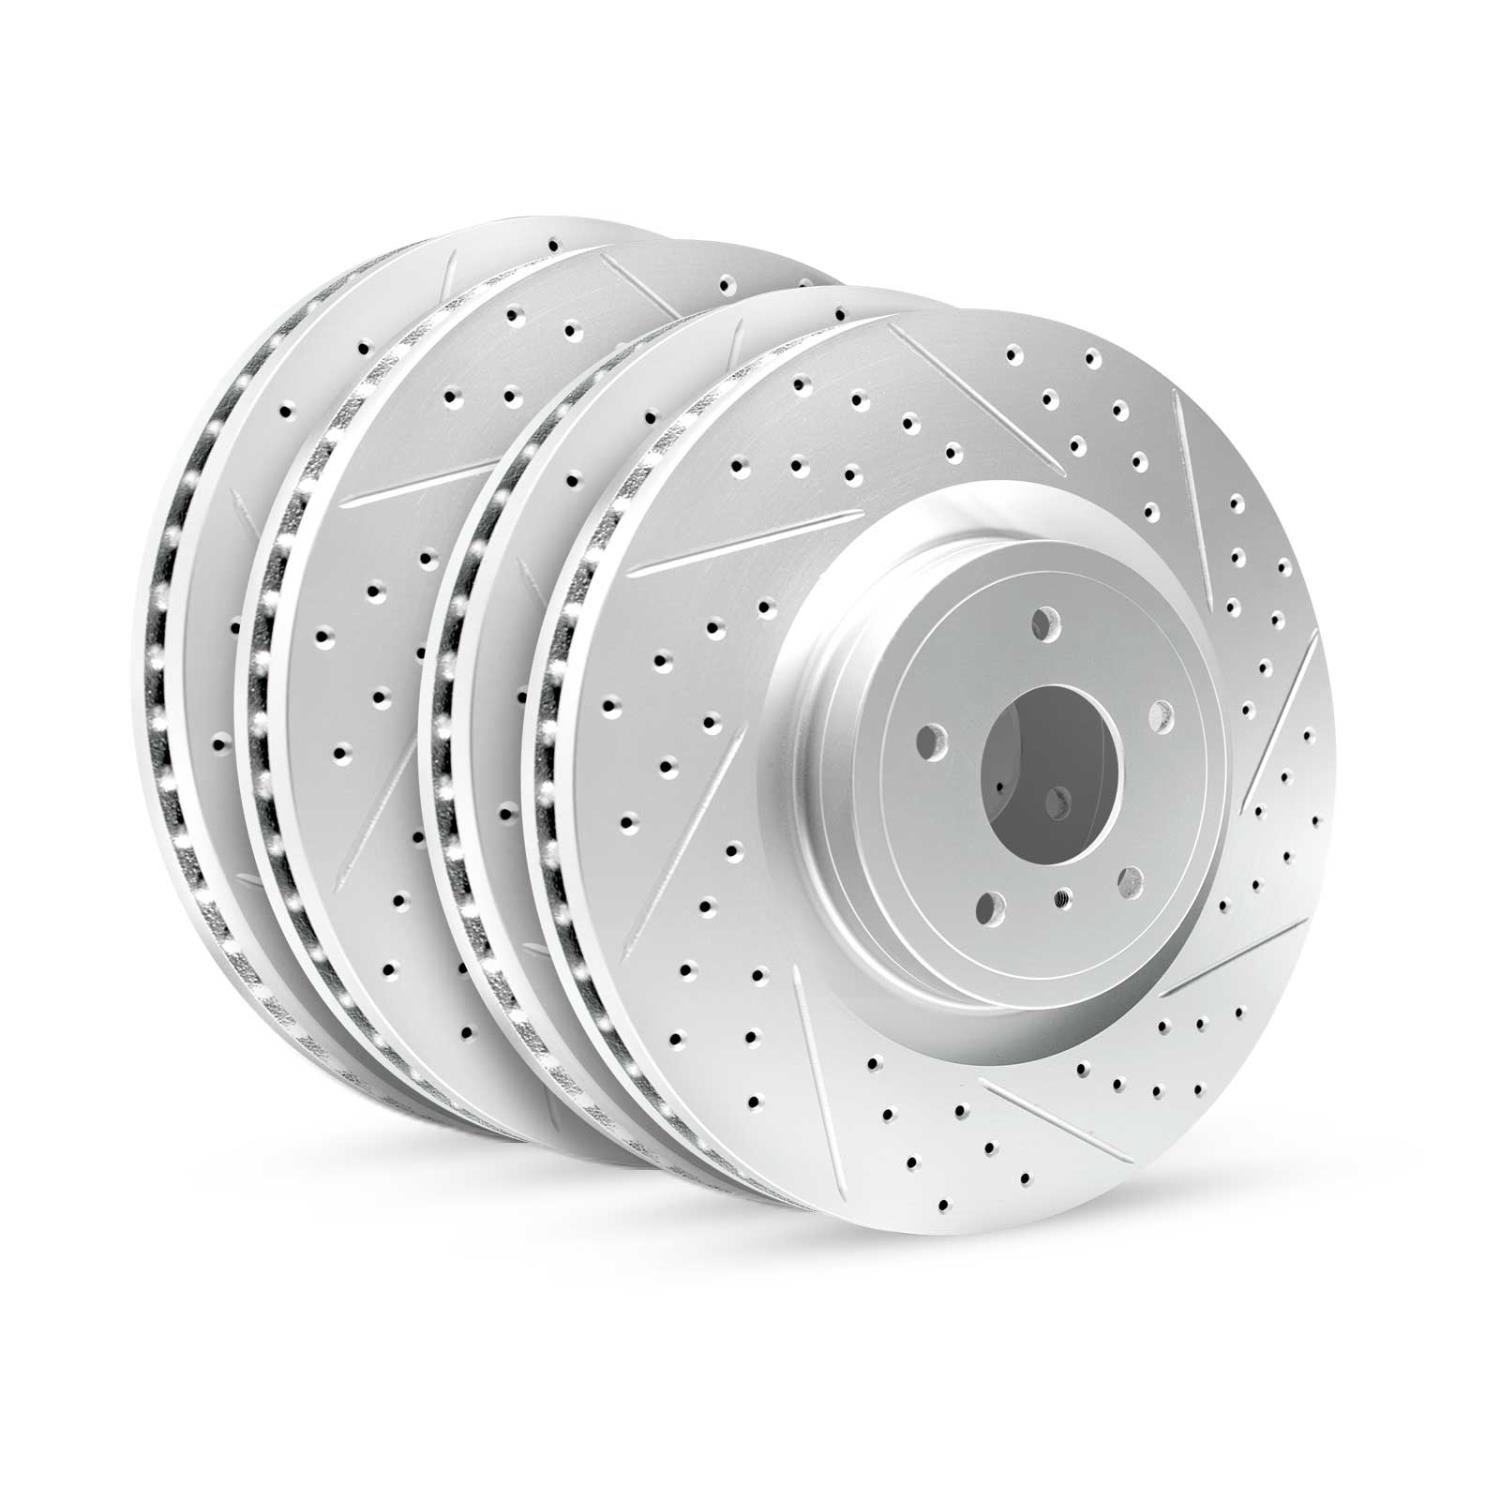 GEO-Carbon Drilled/Slotted Rotors, 2004-2005 Infiniti/Nissan,